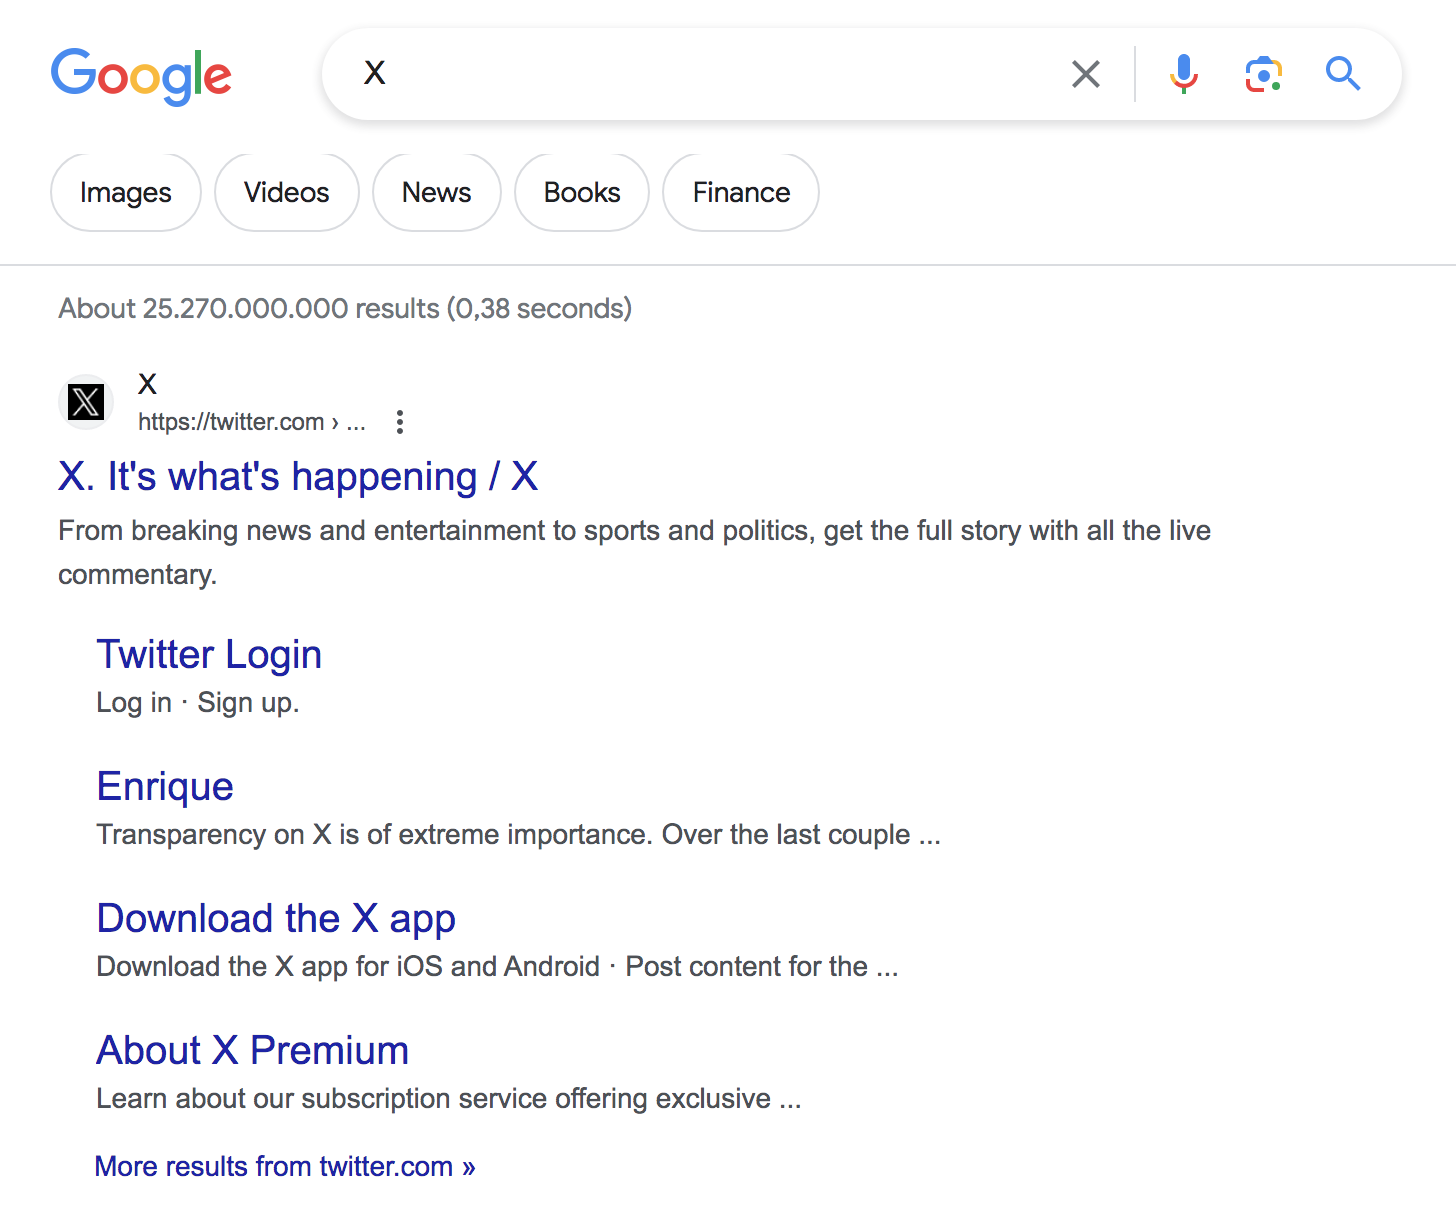 Google's result for logging in or signing up for X